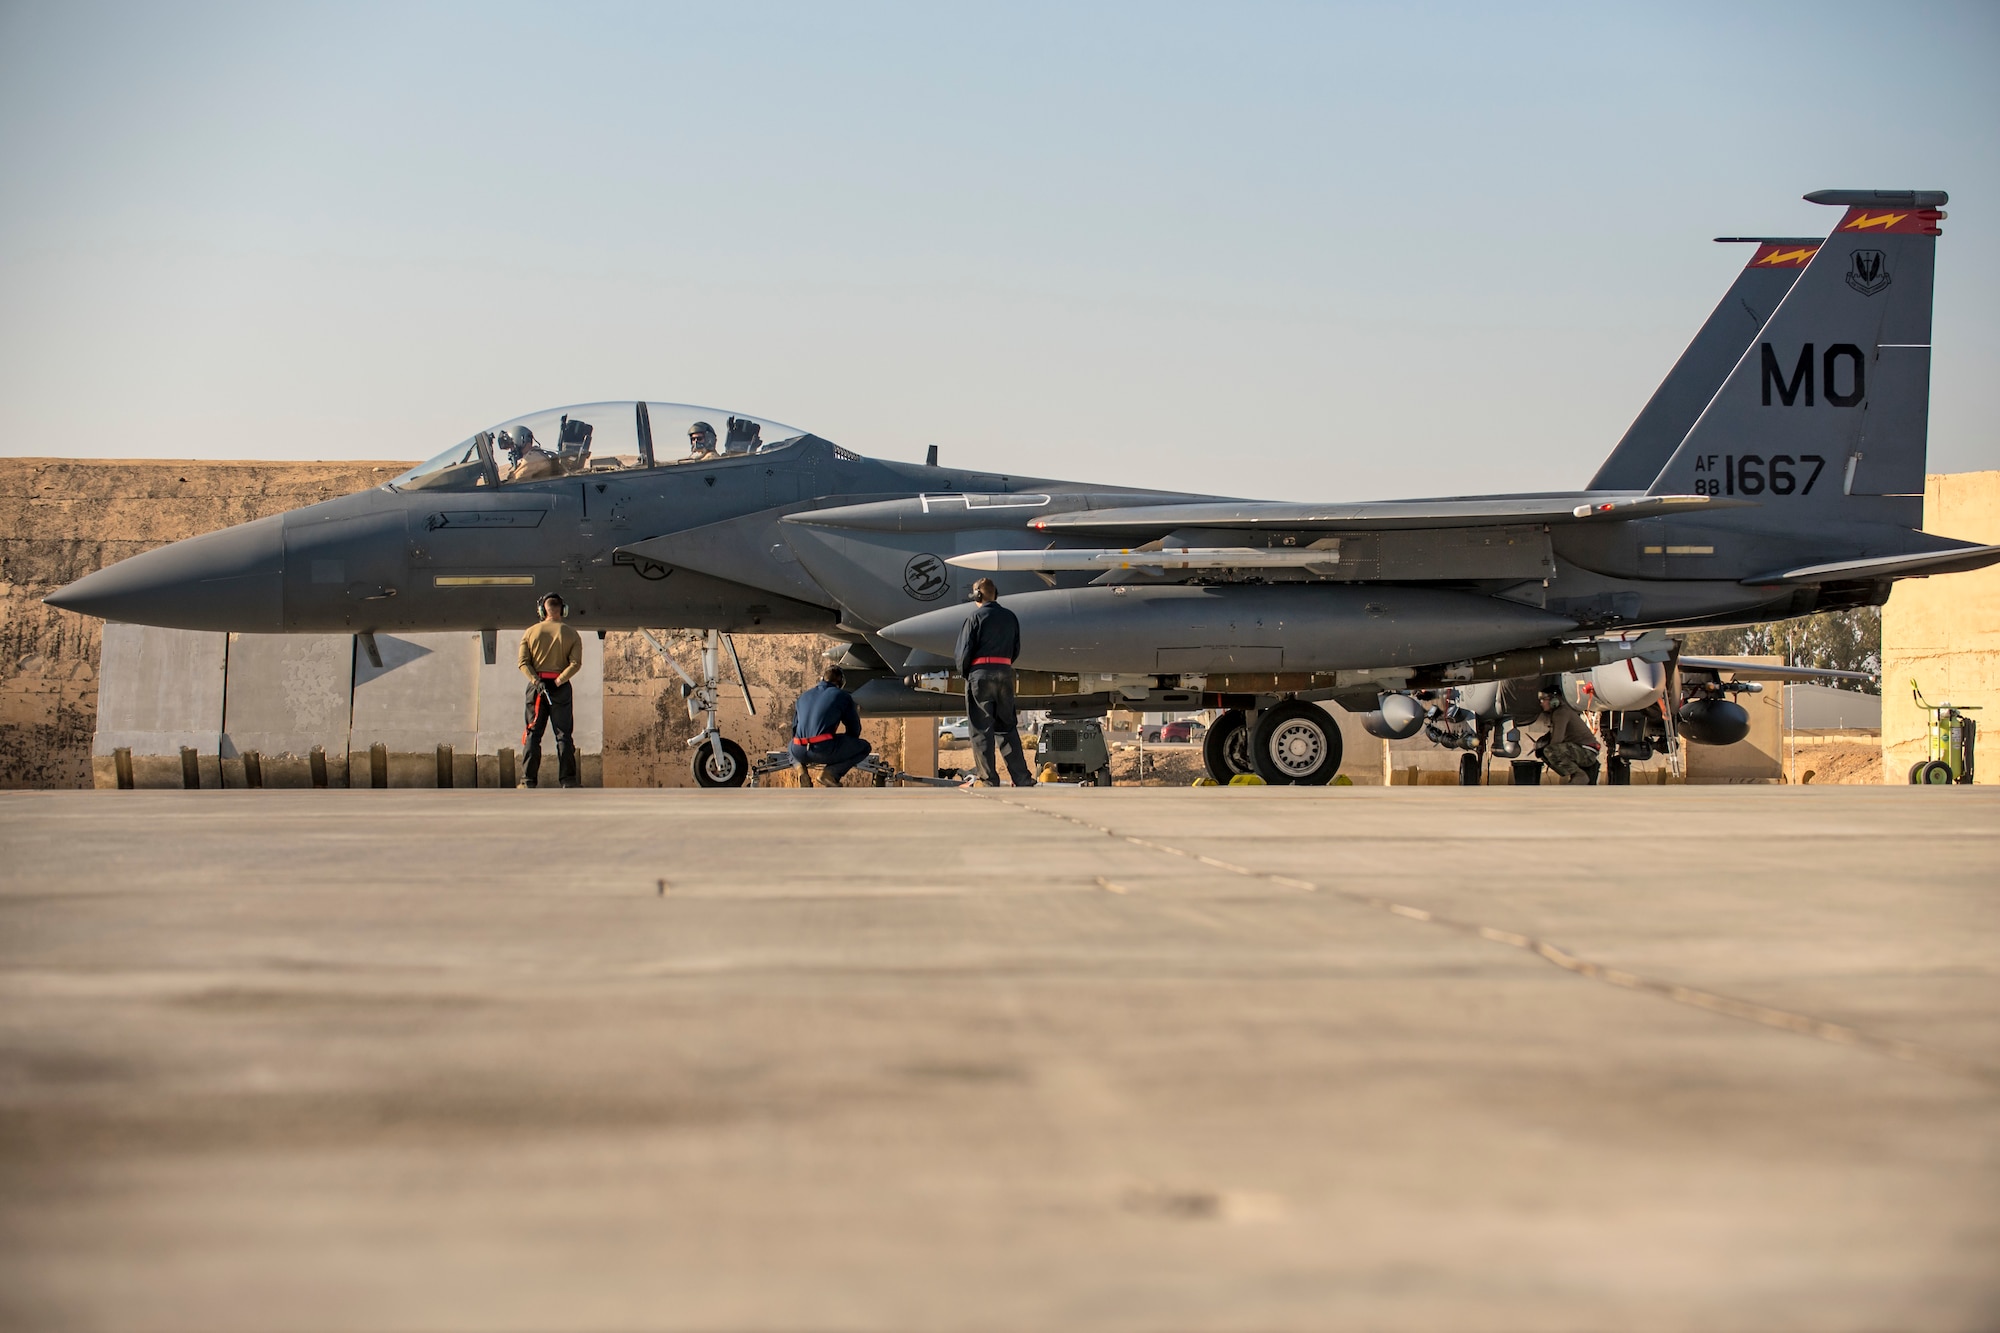 Crew chiefs recover an F-15E Strike Eagle after flight